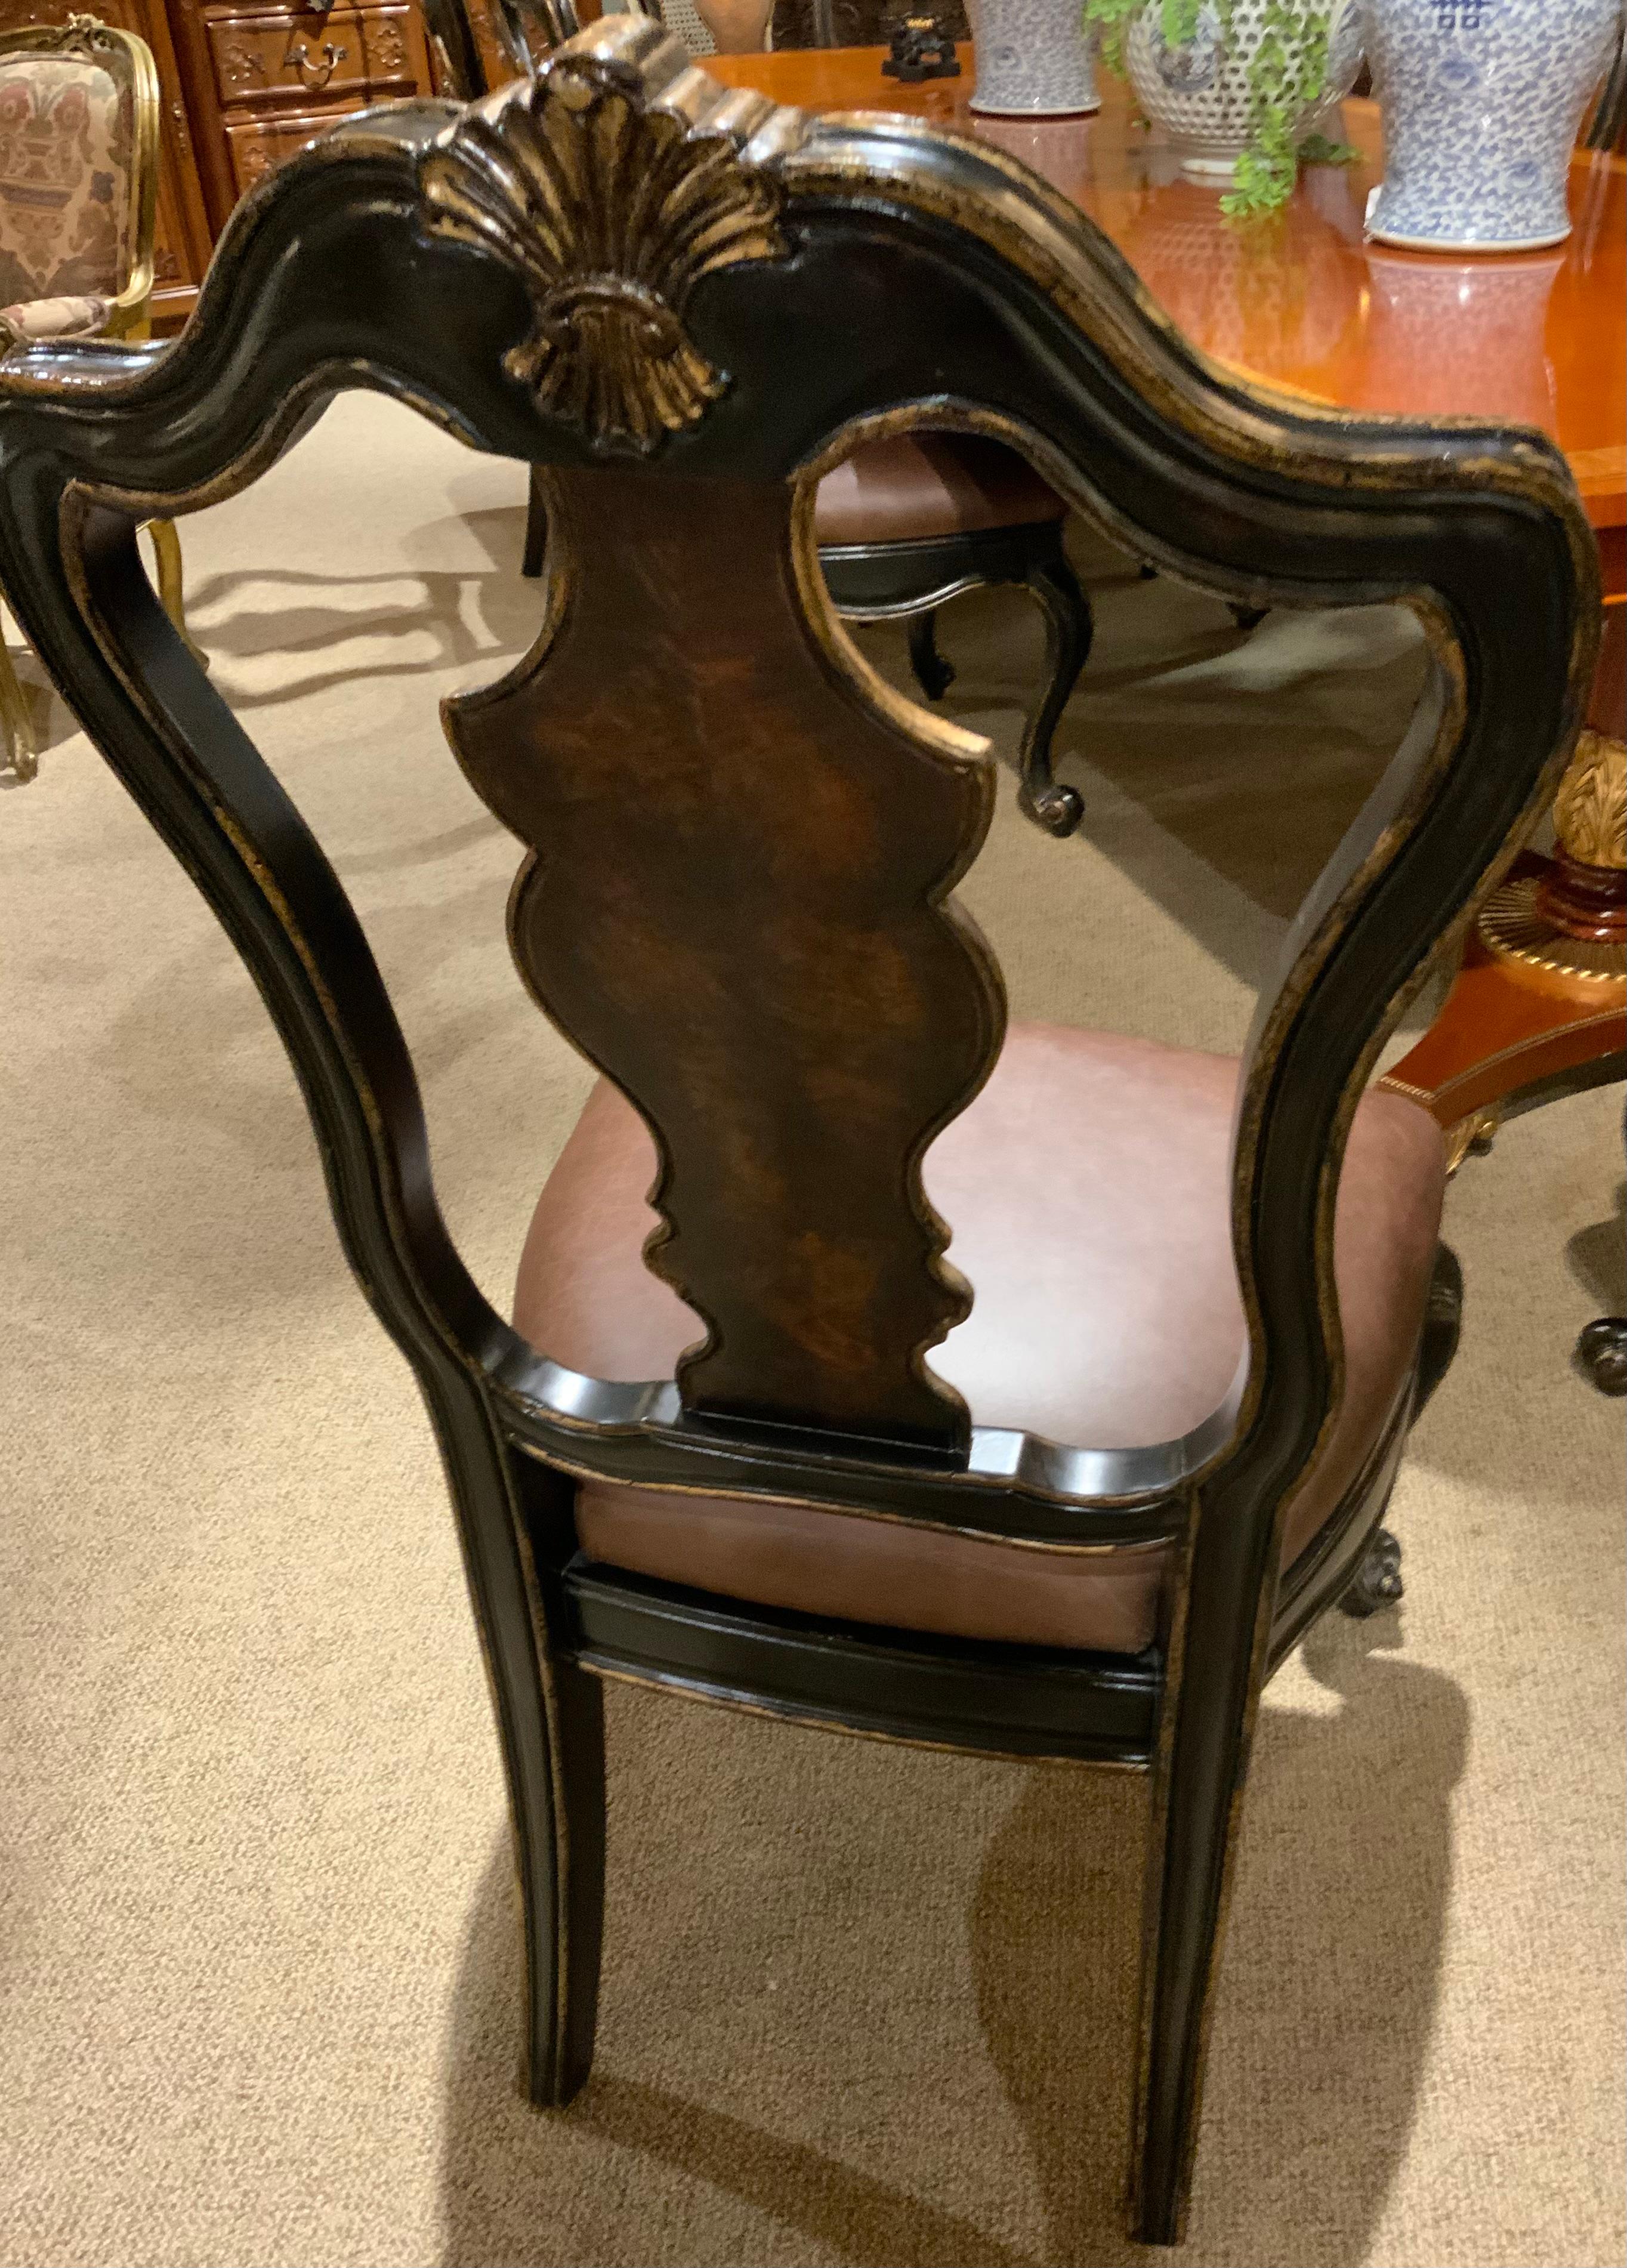 The seats are generous in size and very comfortable.
The burl wood has a fine patina. The ebonized finish 
Has applied gilt accents. The front legs are fashioned
In a Louis XV-Style cabriole leg that ends in a curl. The
Crest of the chairs have a